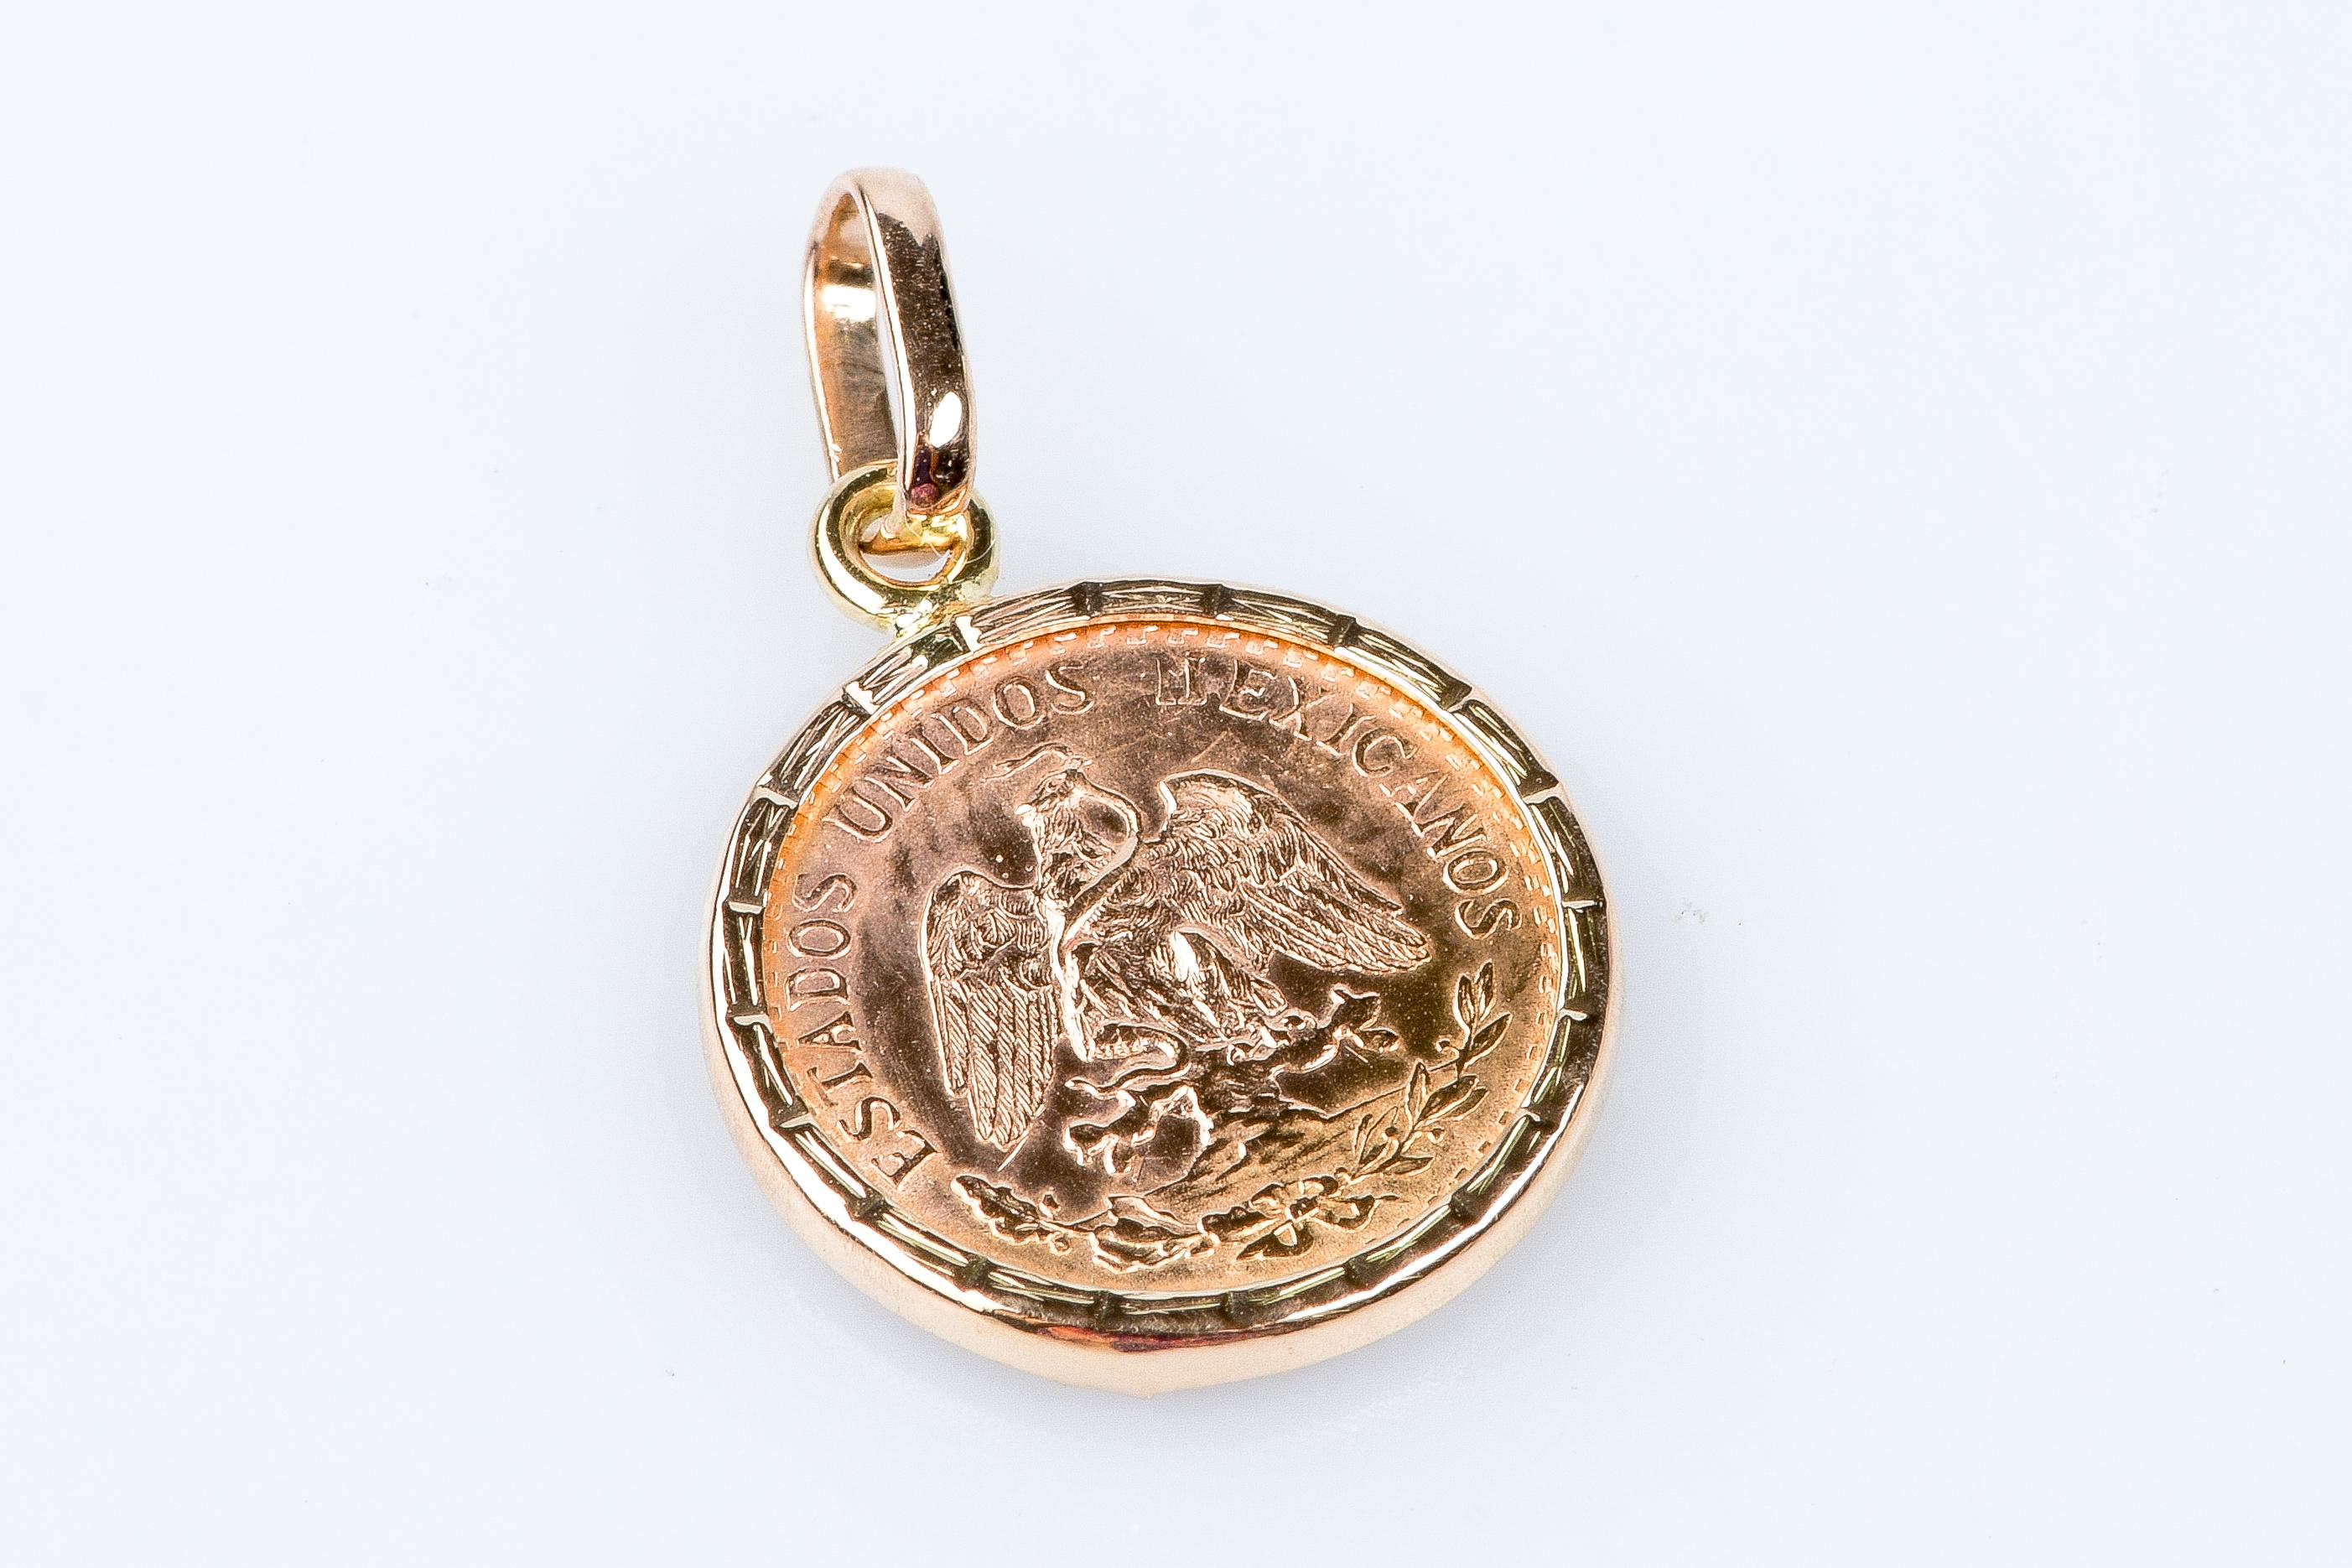 18 carat pink gold pendant coin Estados Unidos Mexicanos de 2 Pesos of the year 1945. Eagle standing on a cactus holding a snake on the crown formed by an oak and an olive branch. On the back, 1945 Dos Pesos in a crown. 

Weight : 2.20 gr.